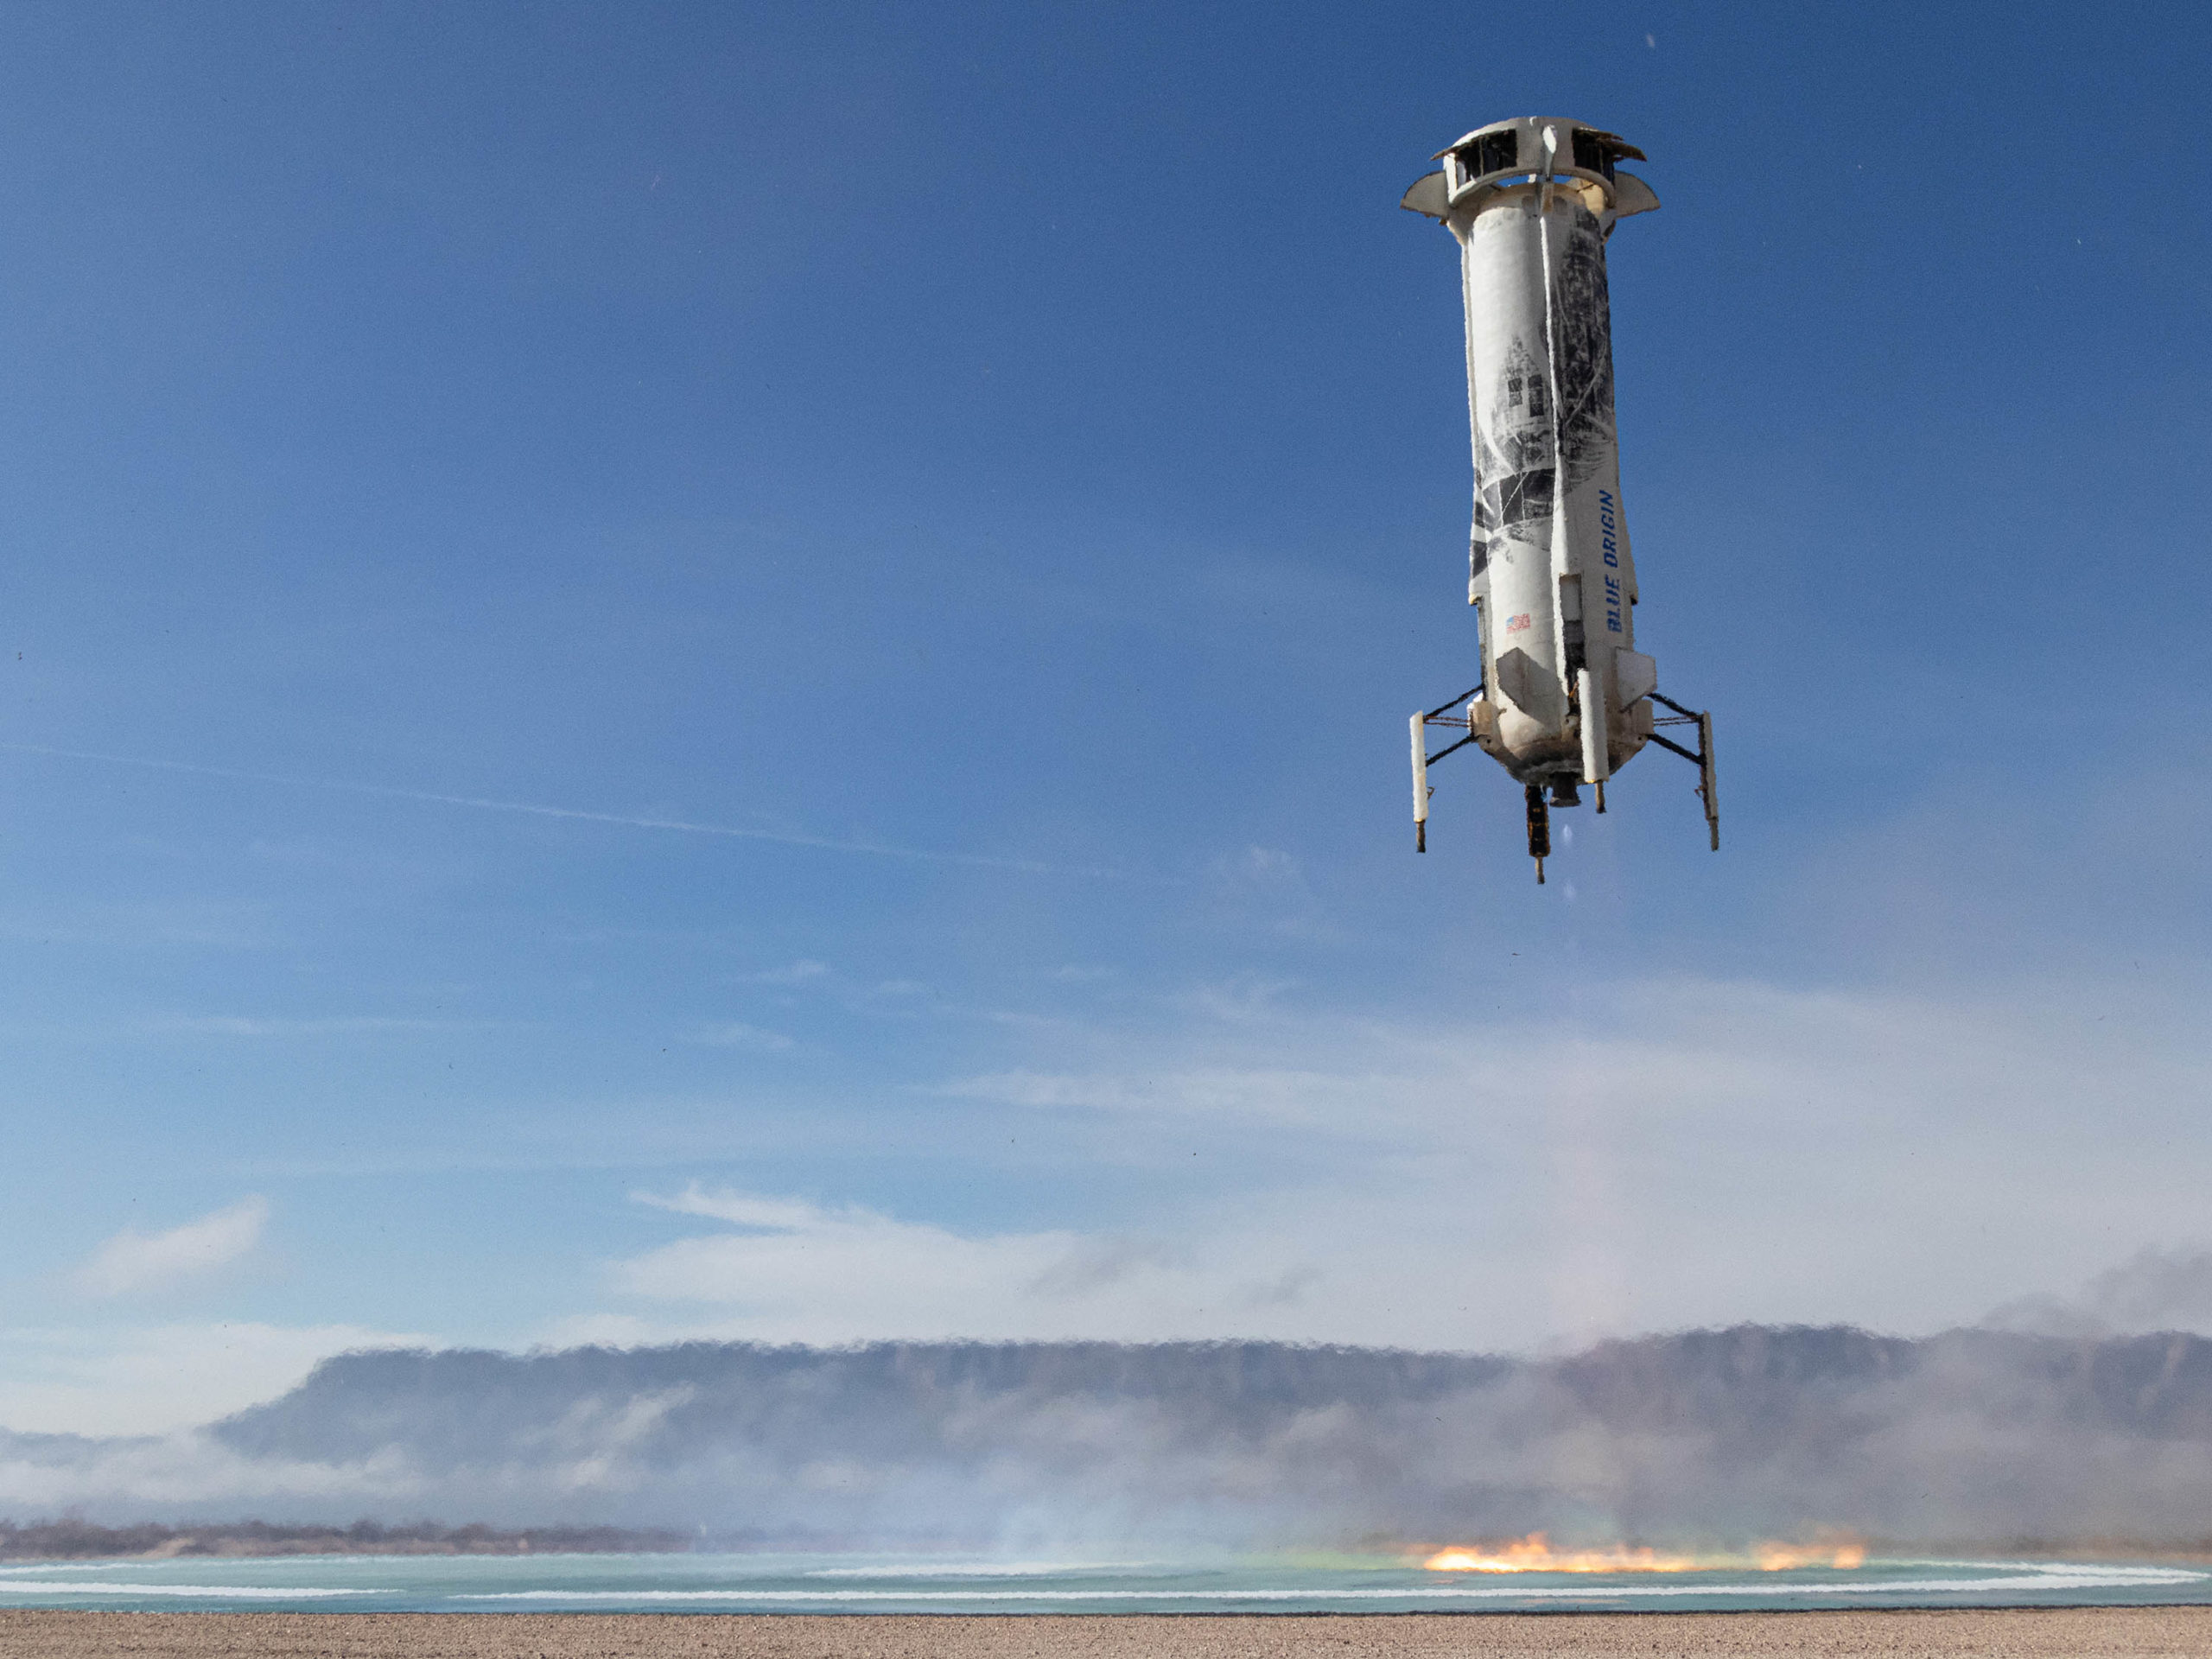 launch of Blue Origin New Shepard was hosted by GMA